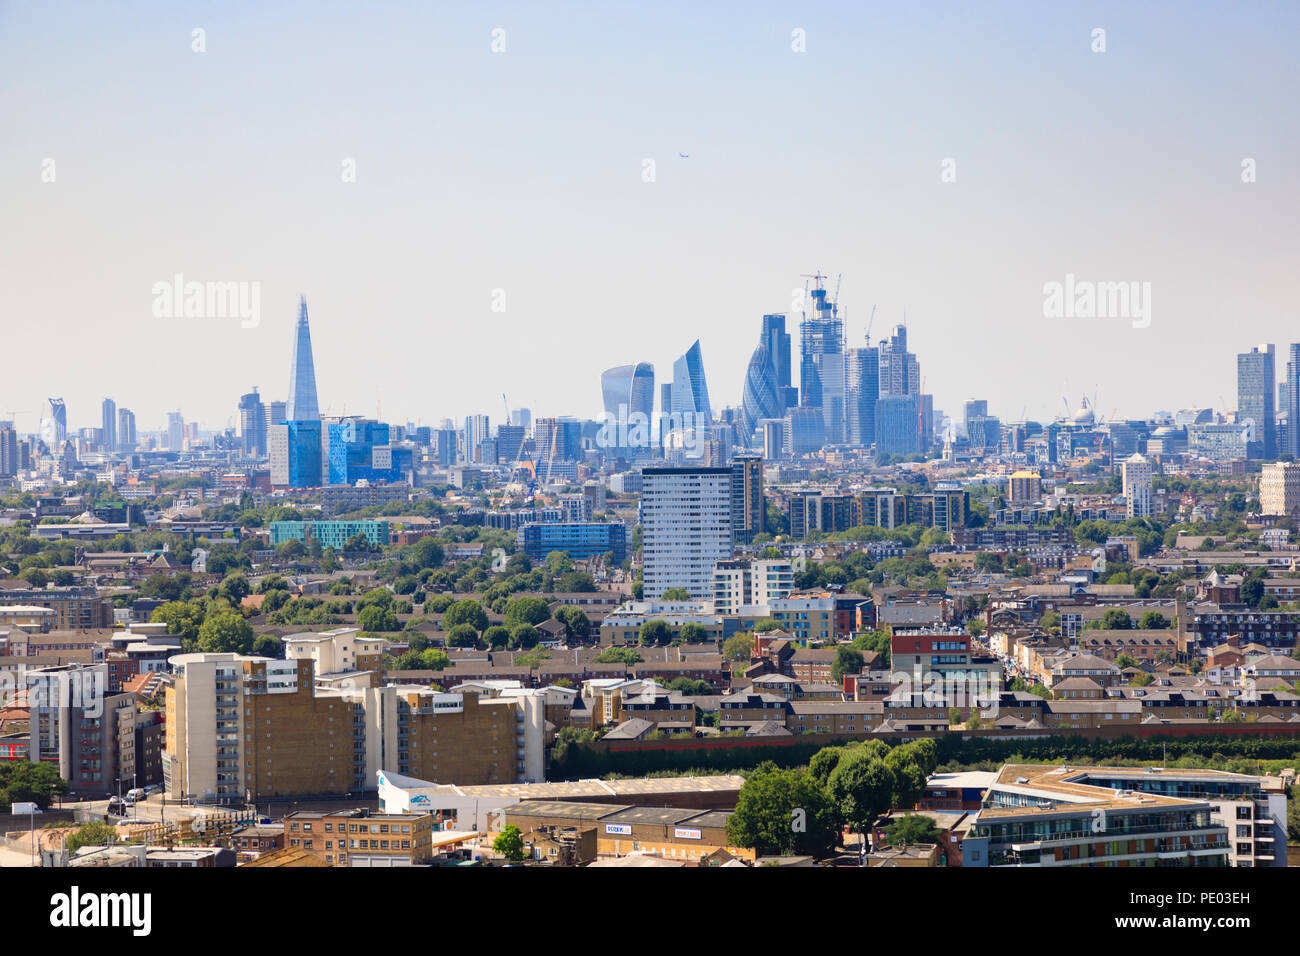 London skyline from the Arcelormittal Orbit sculpture viewing deck. Queen Elizabeth Olympic Park, Stratford, London, England Stock Photo